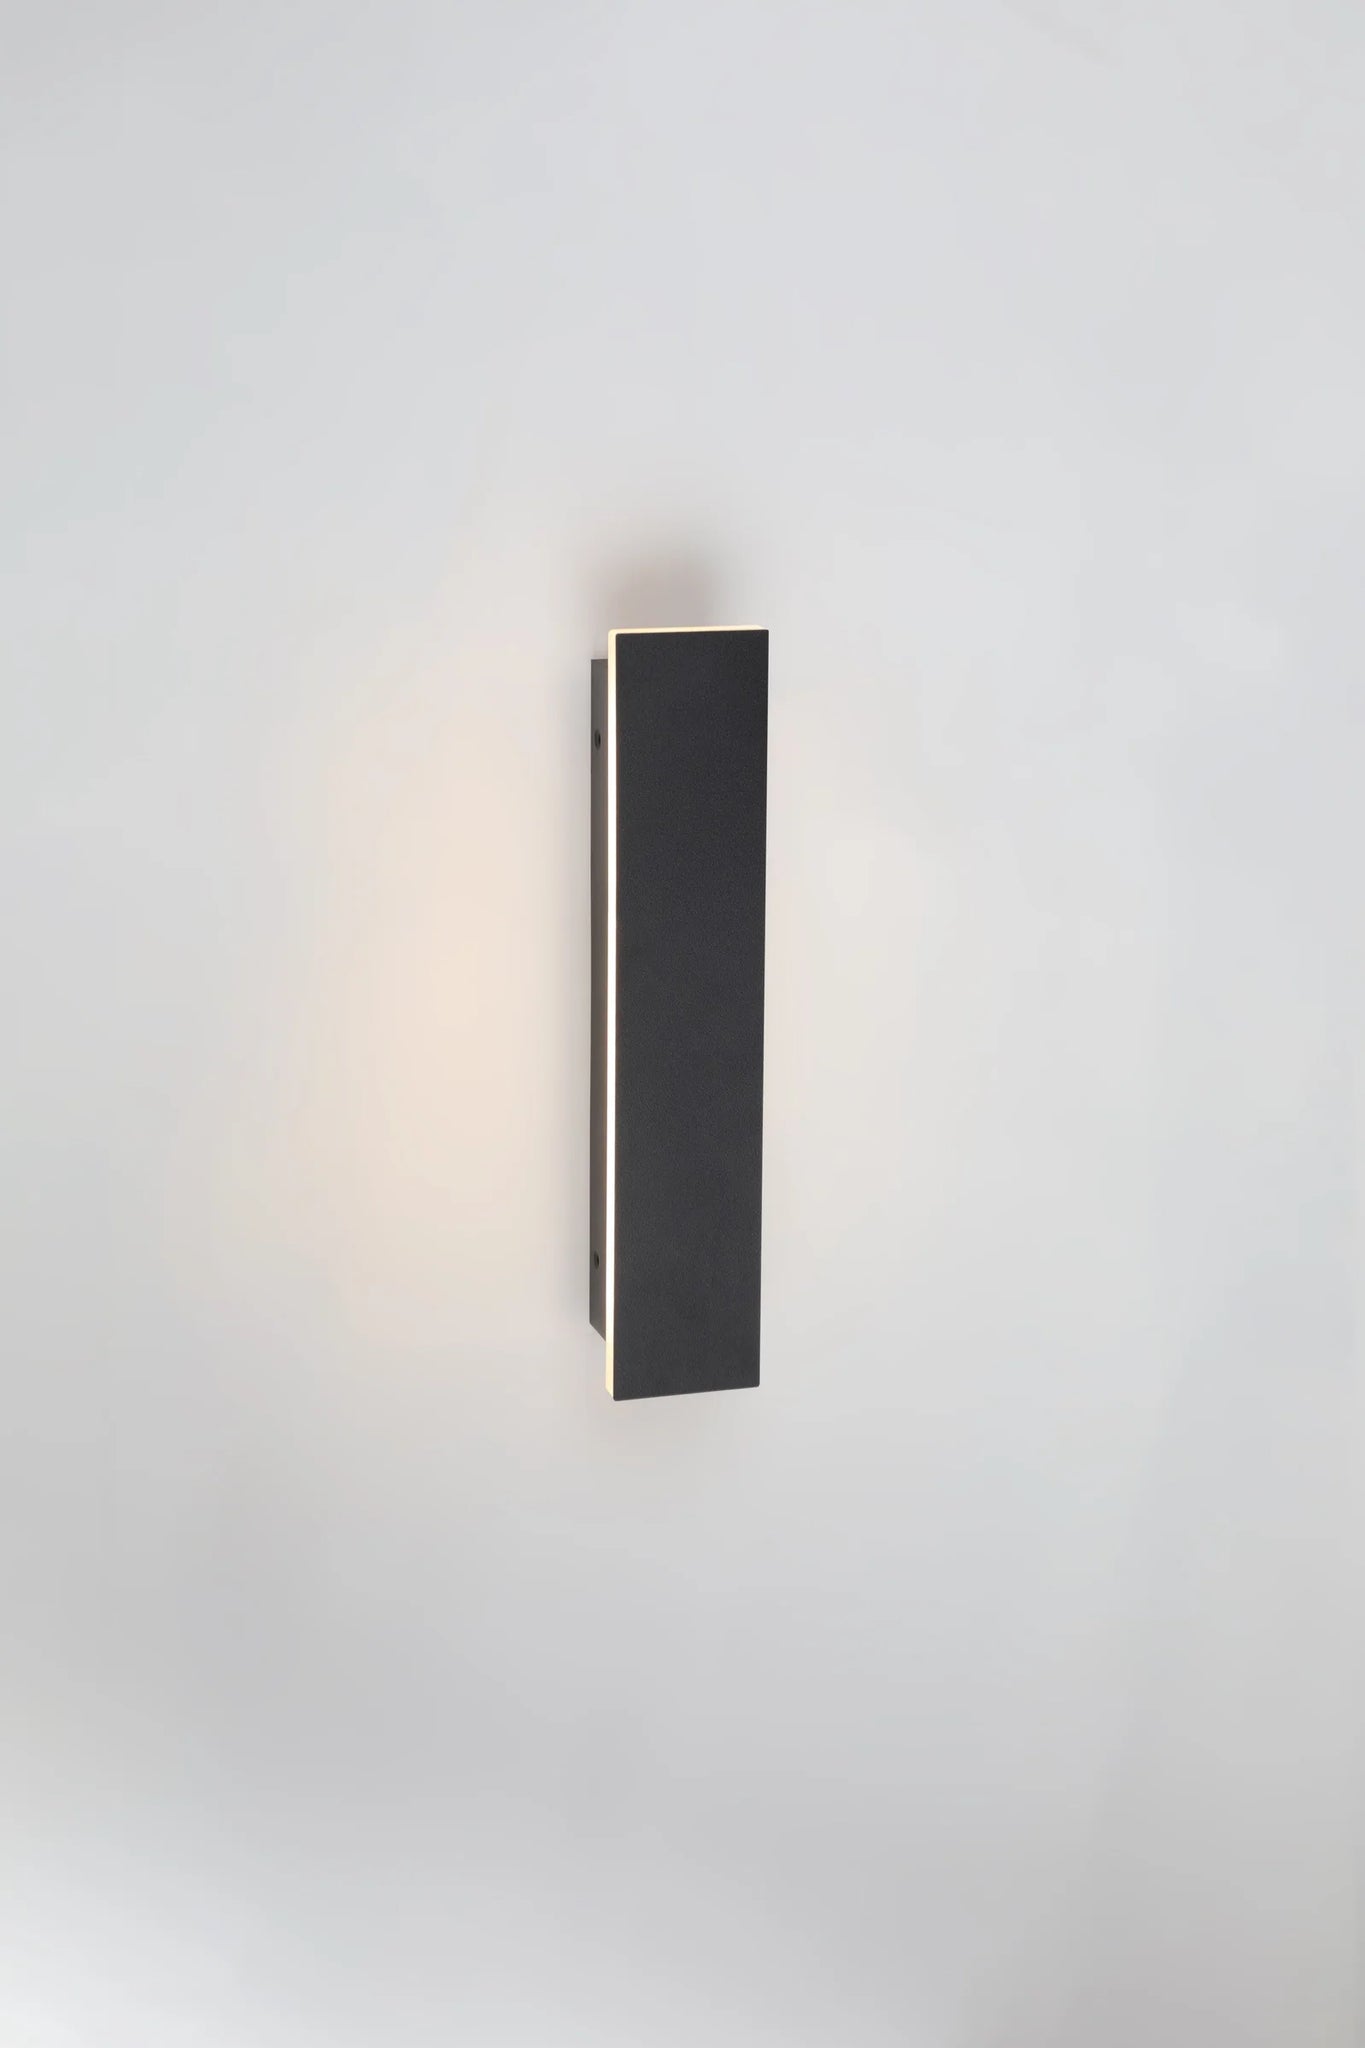 6w Integrated LED Indoor & Outdoor Wall Light in Black, Model LX-Lin30E